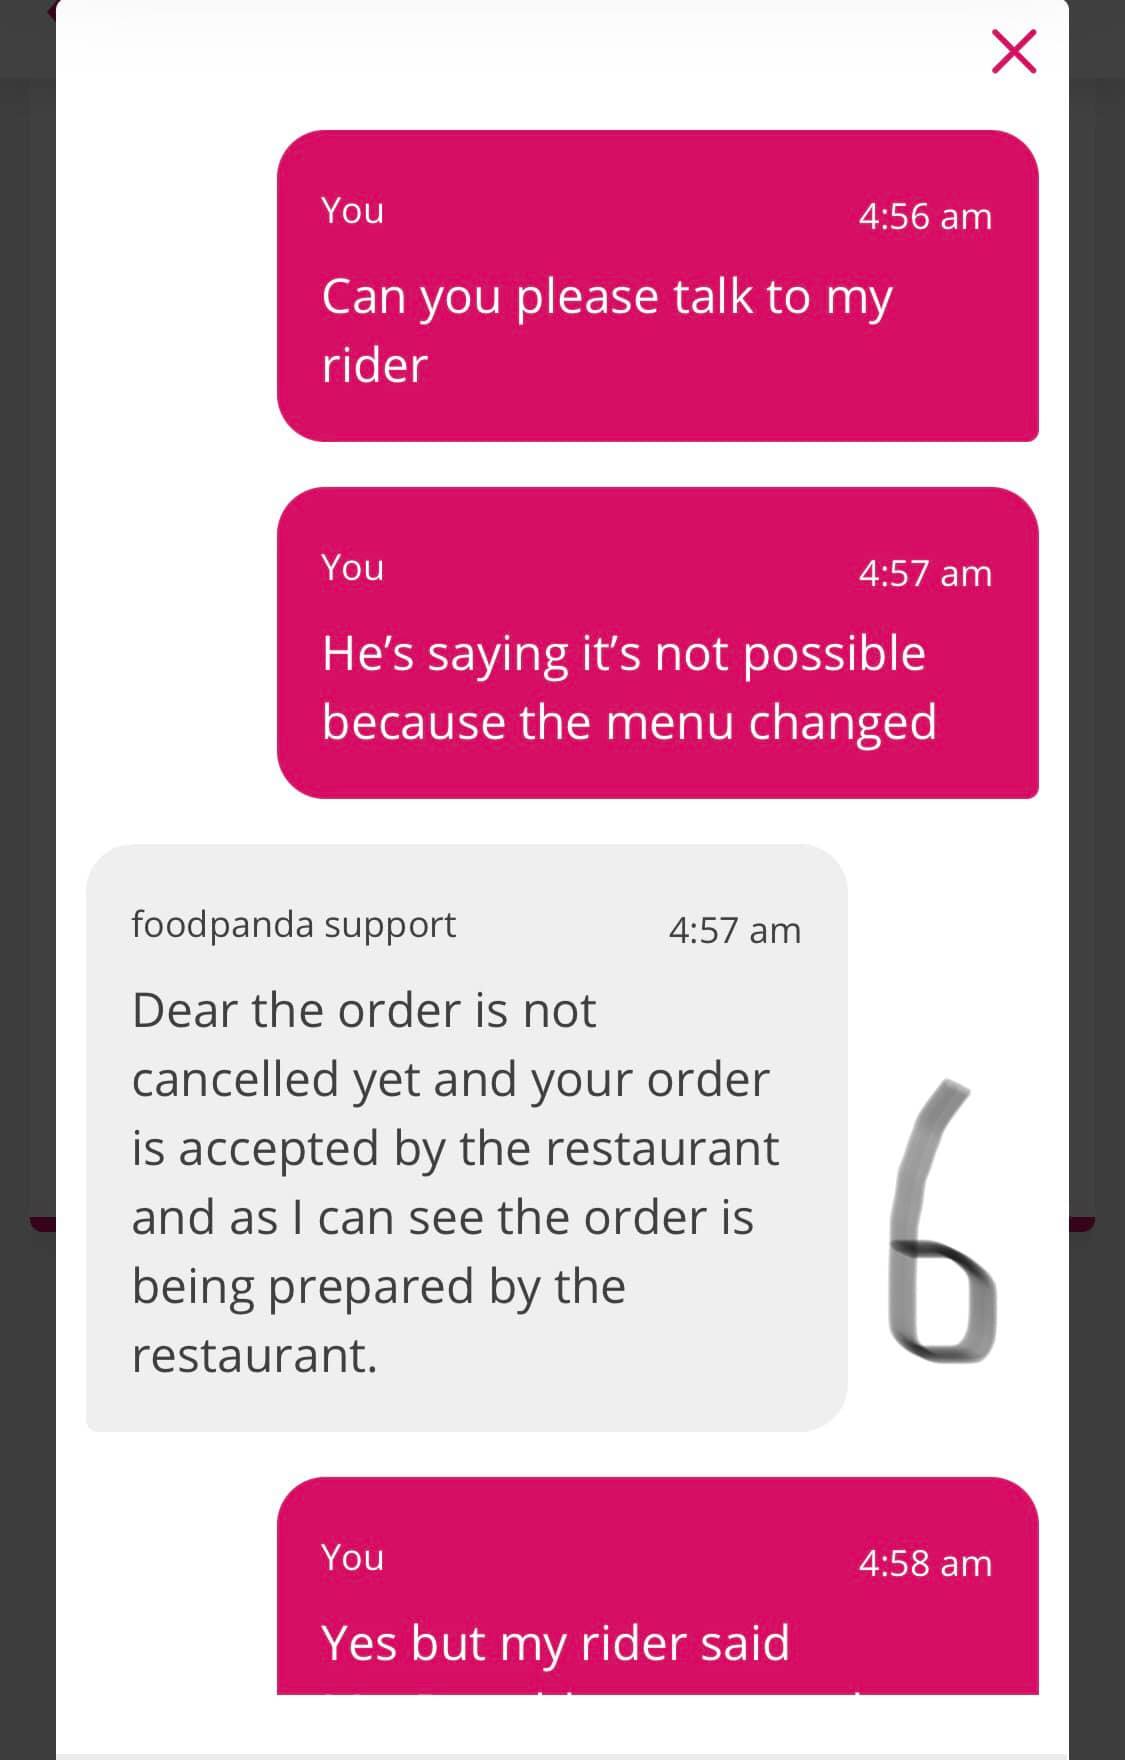 Woman S Foodpanda Order Can T Be Cancelled Rider Had To Drop Off Nothing To Complete Task